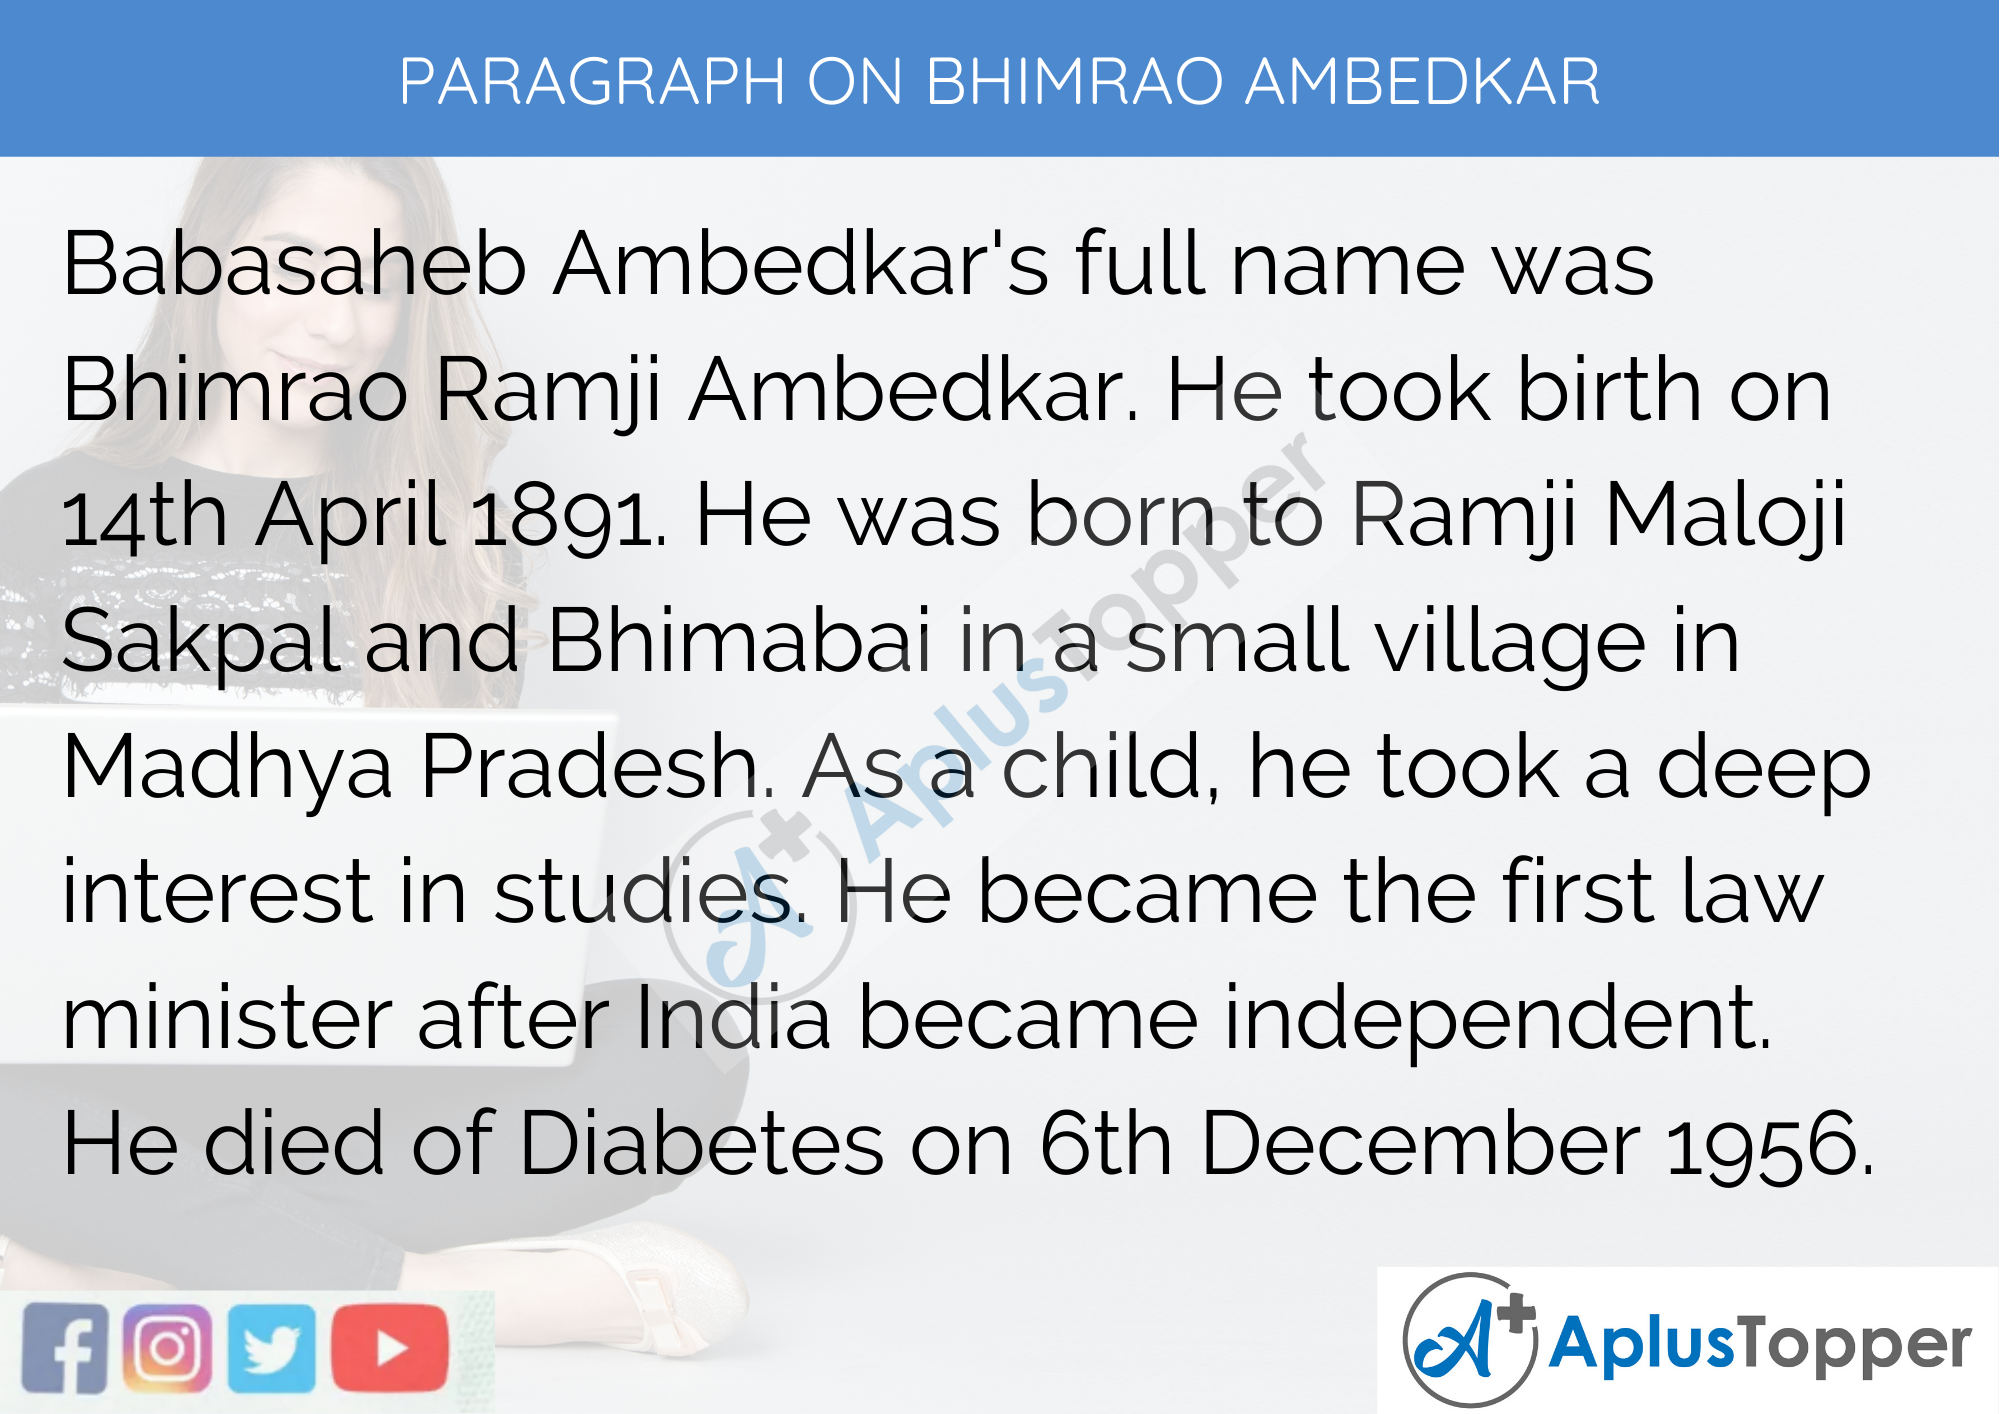 Paragraph on Bhimrao Ambedkar - 100 Words for Classes 1, 2, 3, Kids